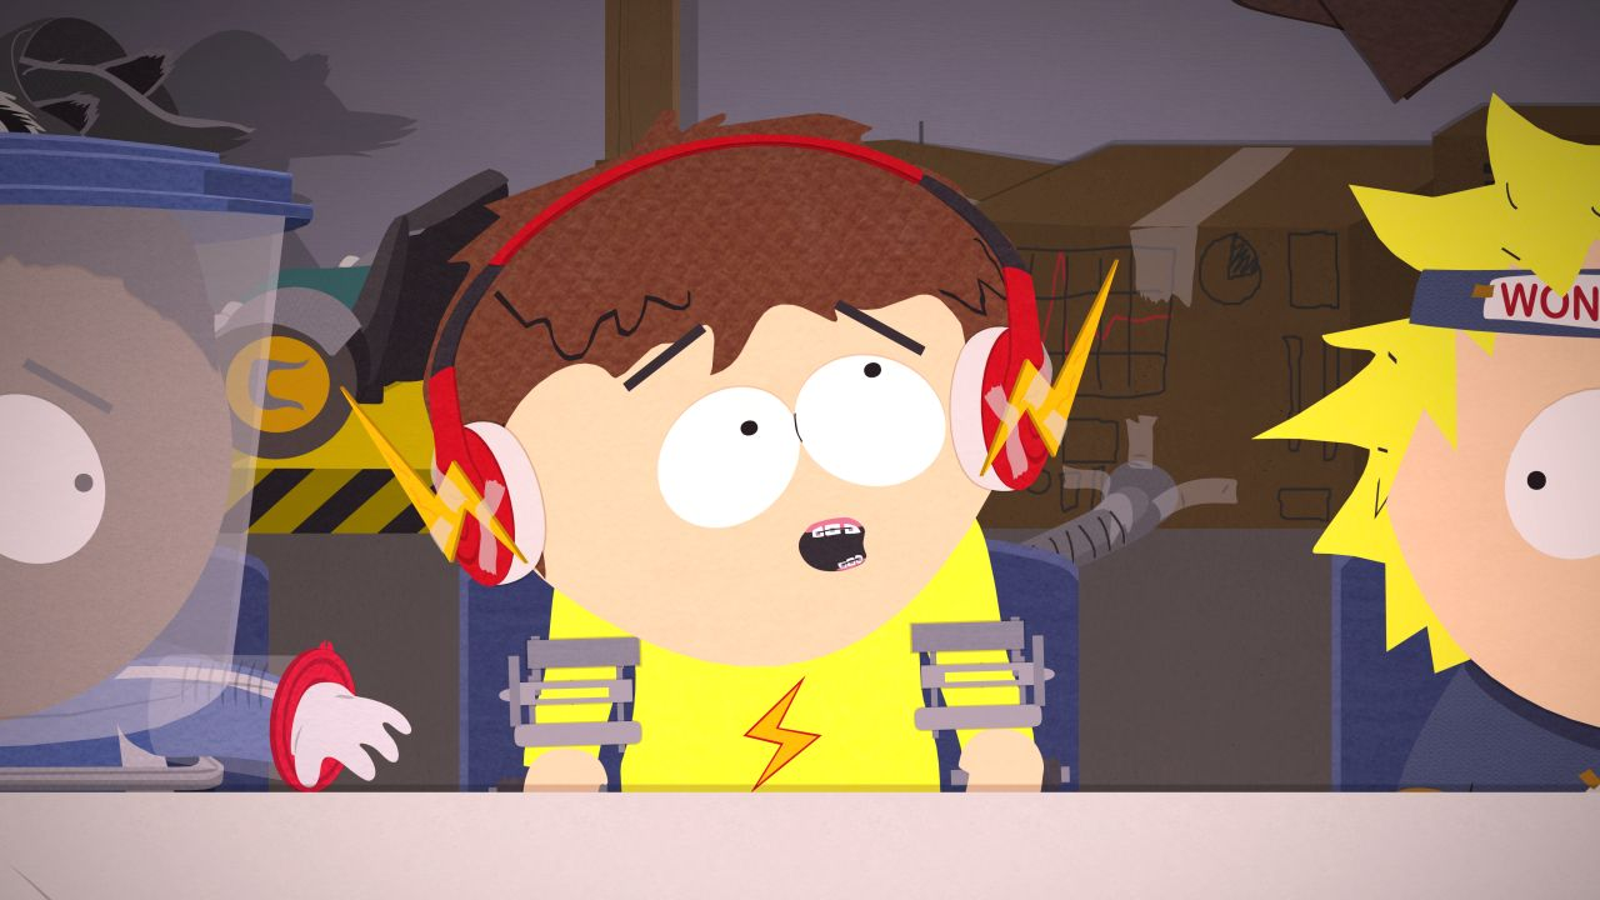 Xbox wins over PS4 in South Park clip